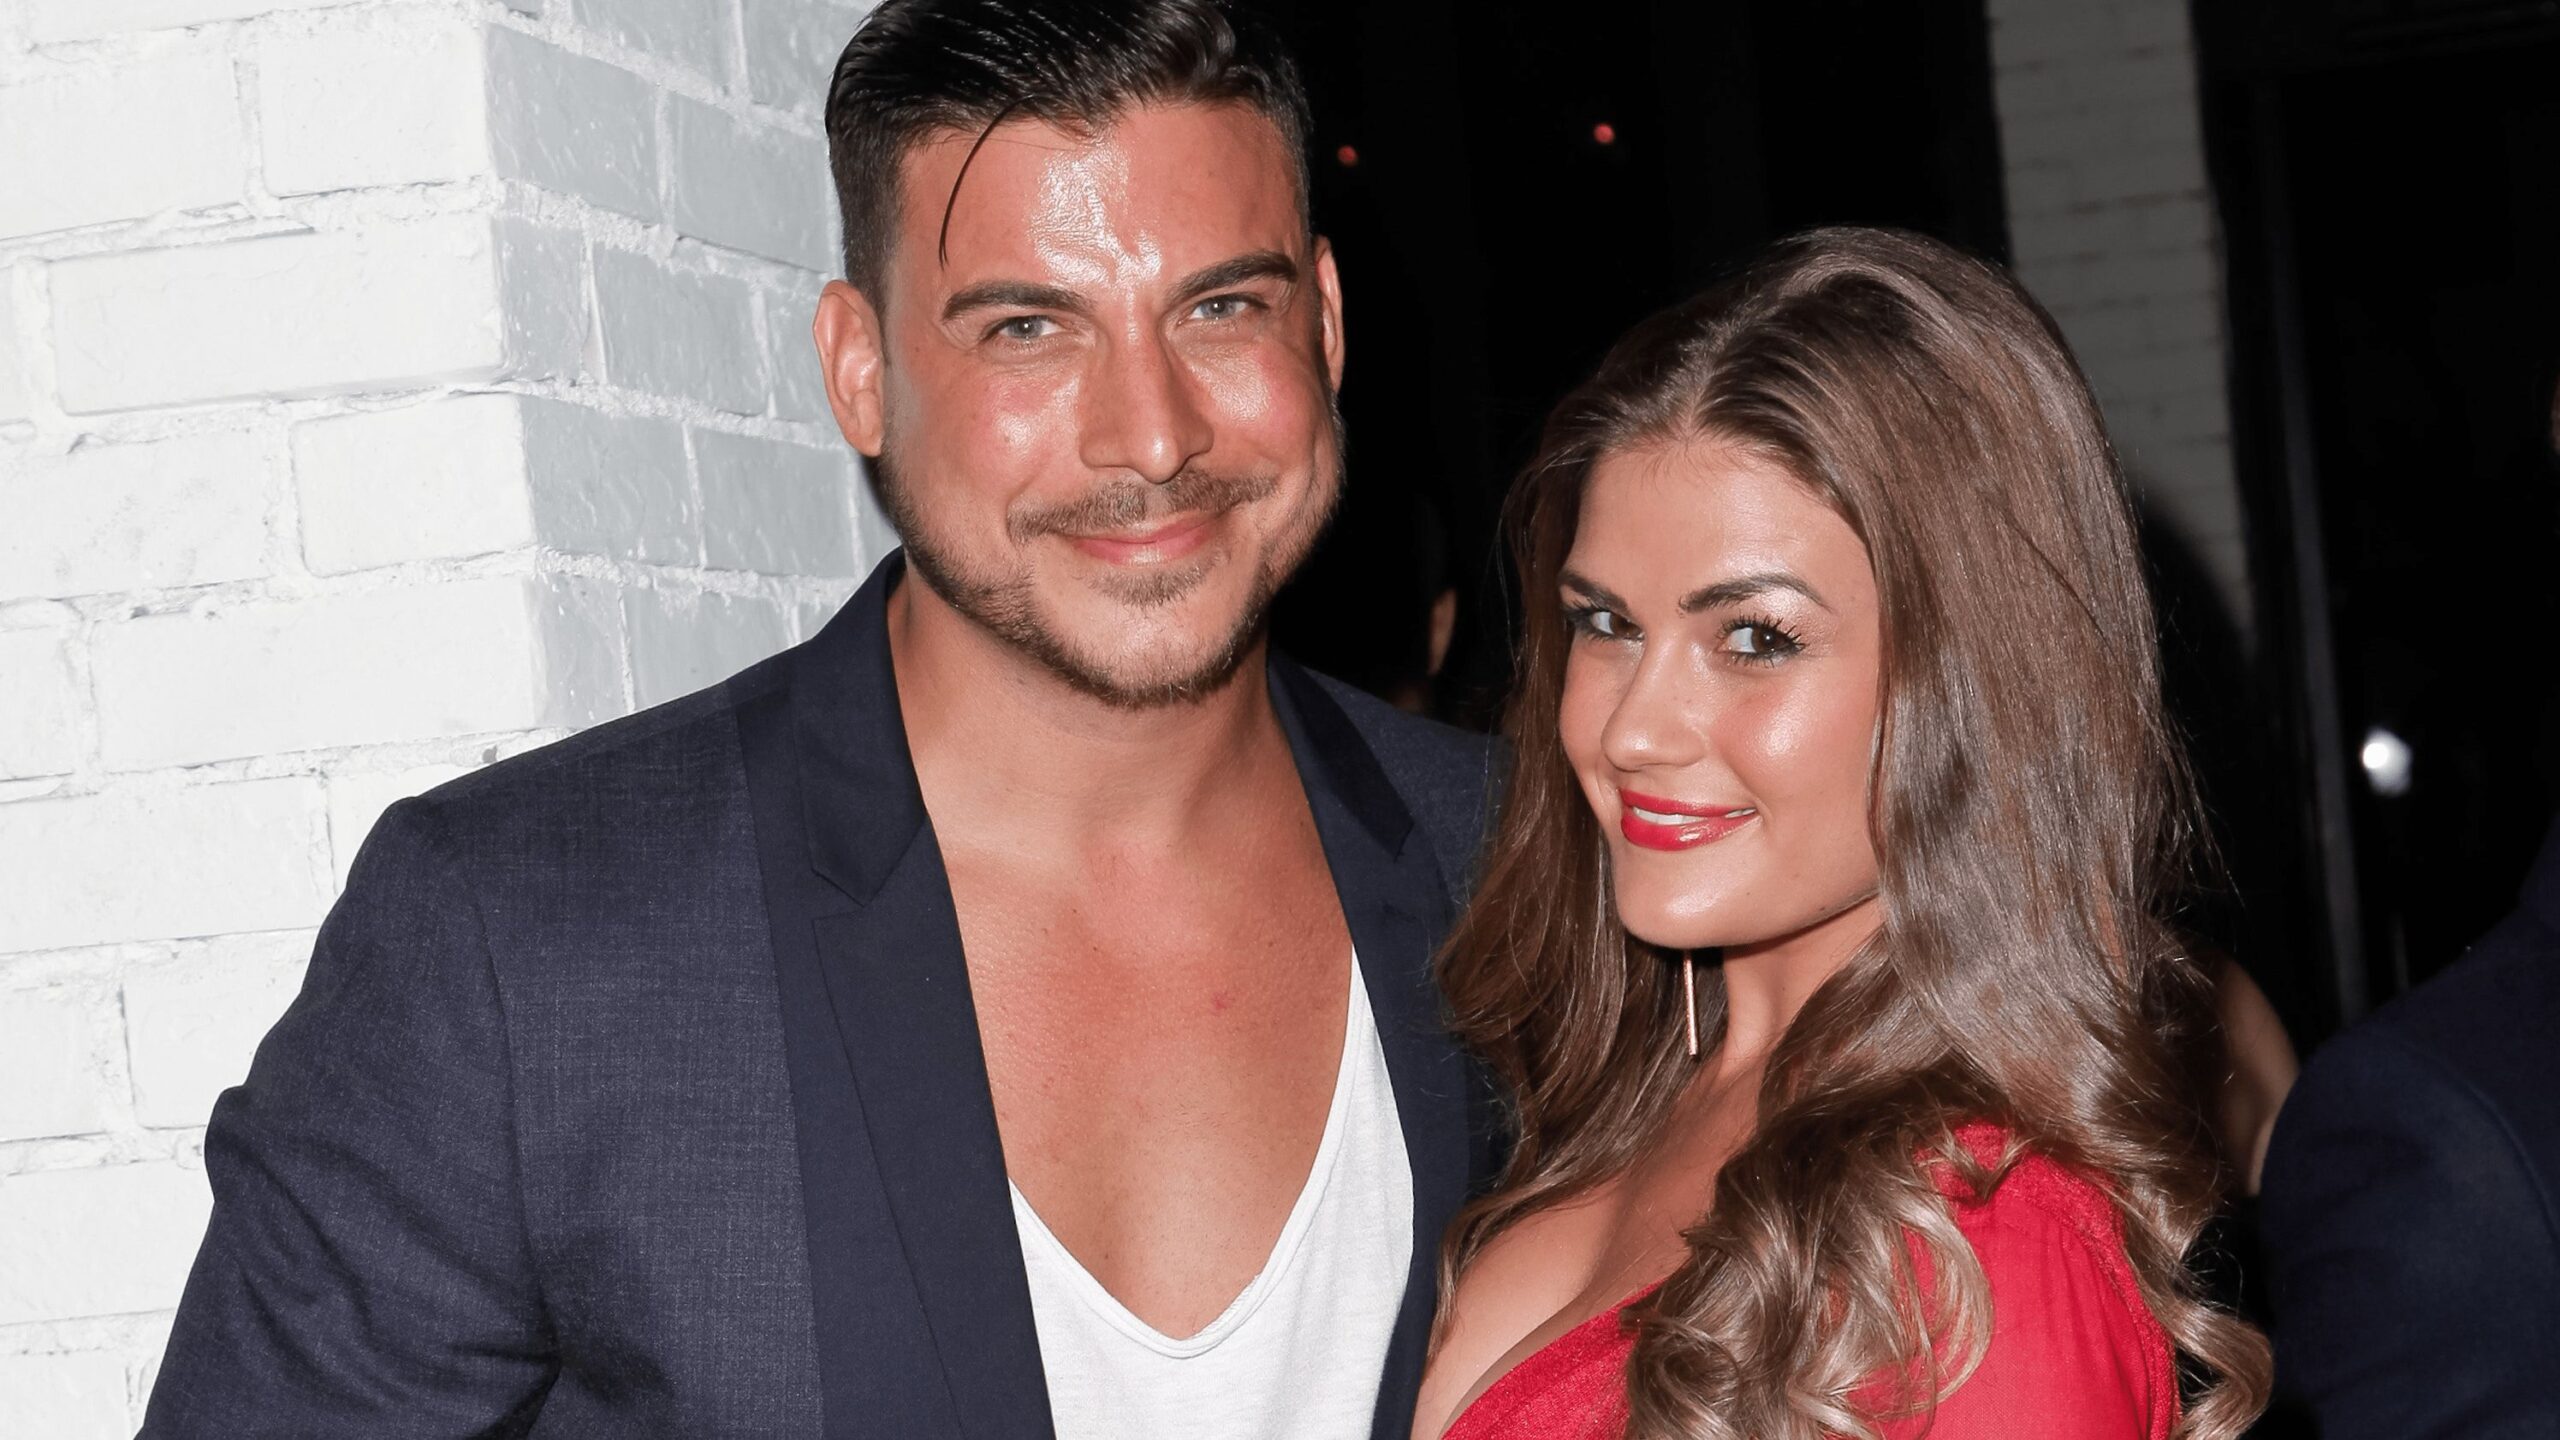 7 Bombshells from Vanderpump Rules That Became Fan Faves